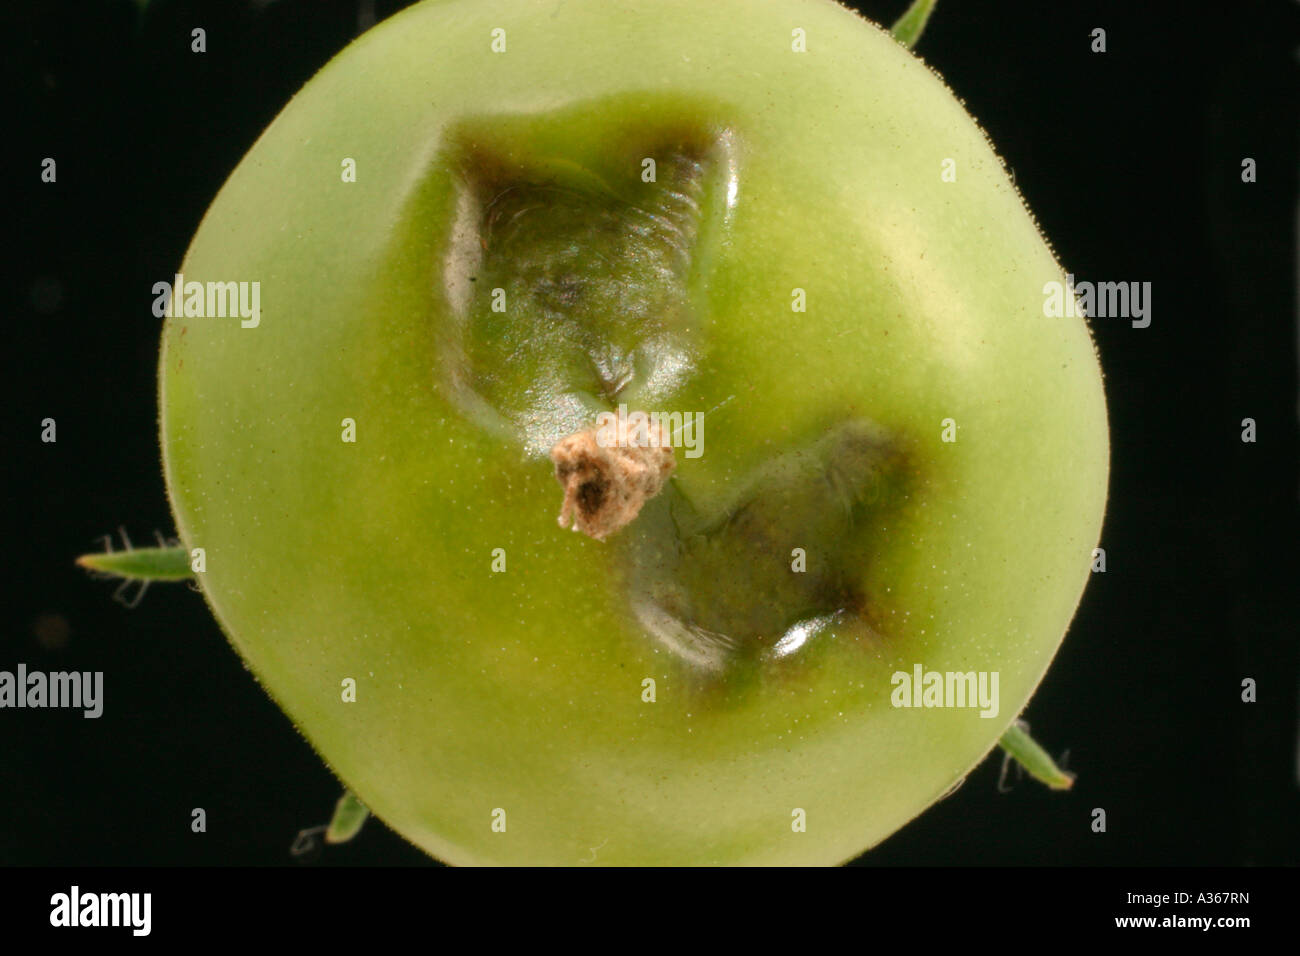 BLOSSOM END ROT ON GREEN TOMATOES Stock Photo